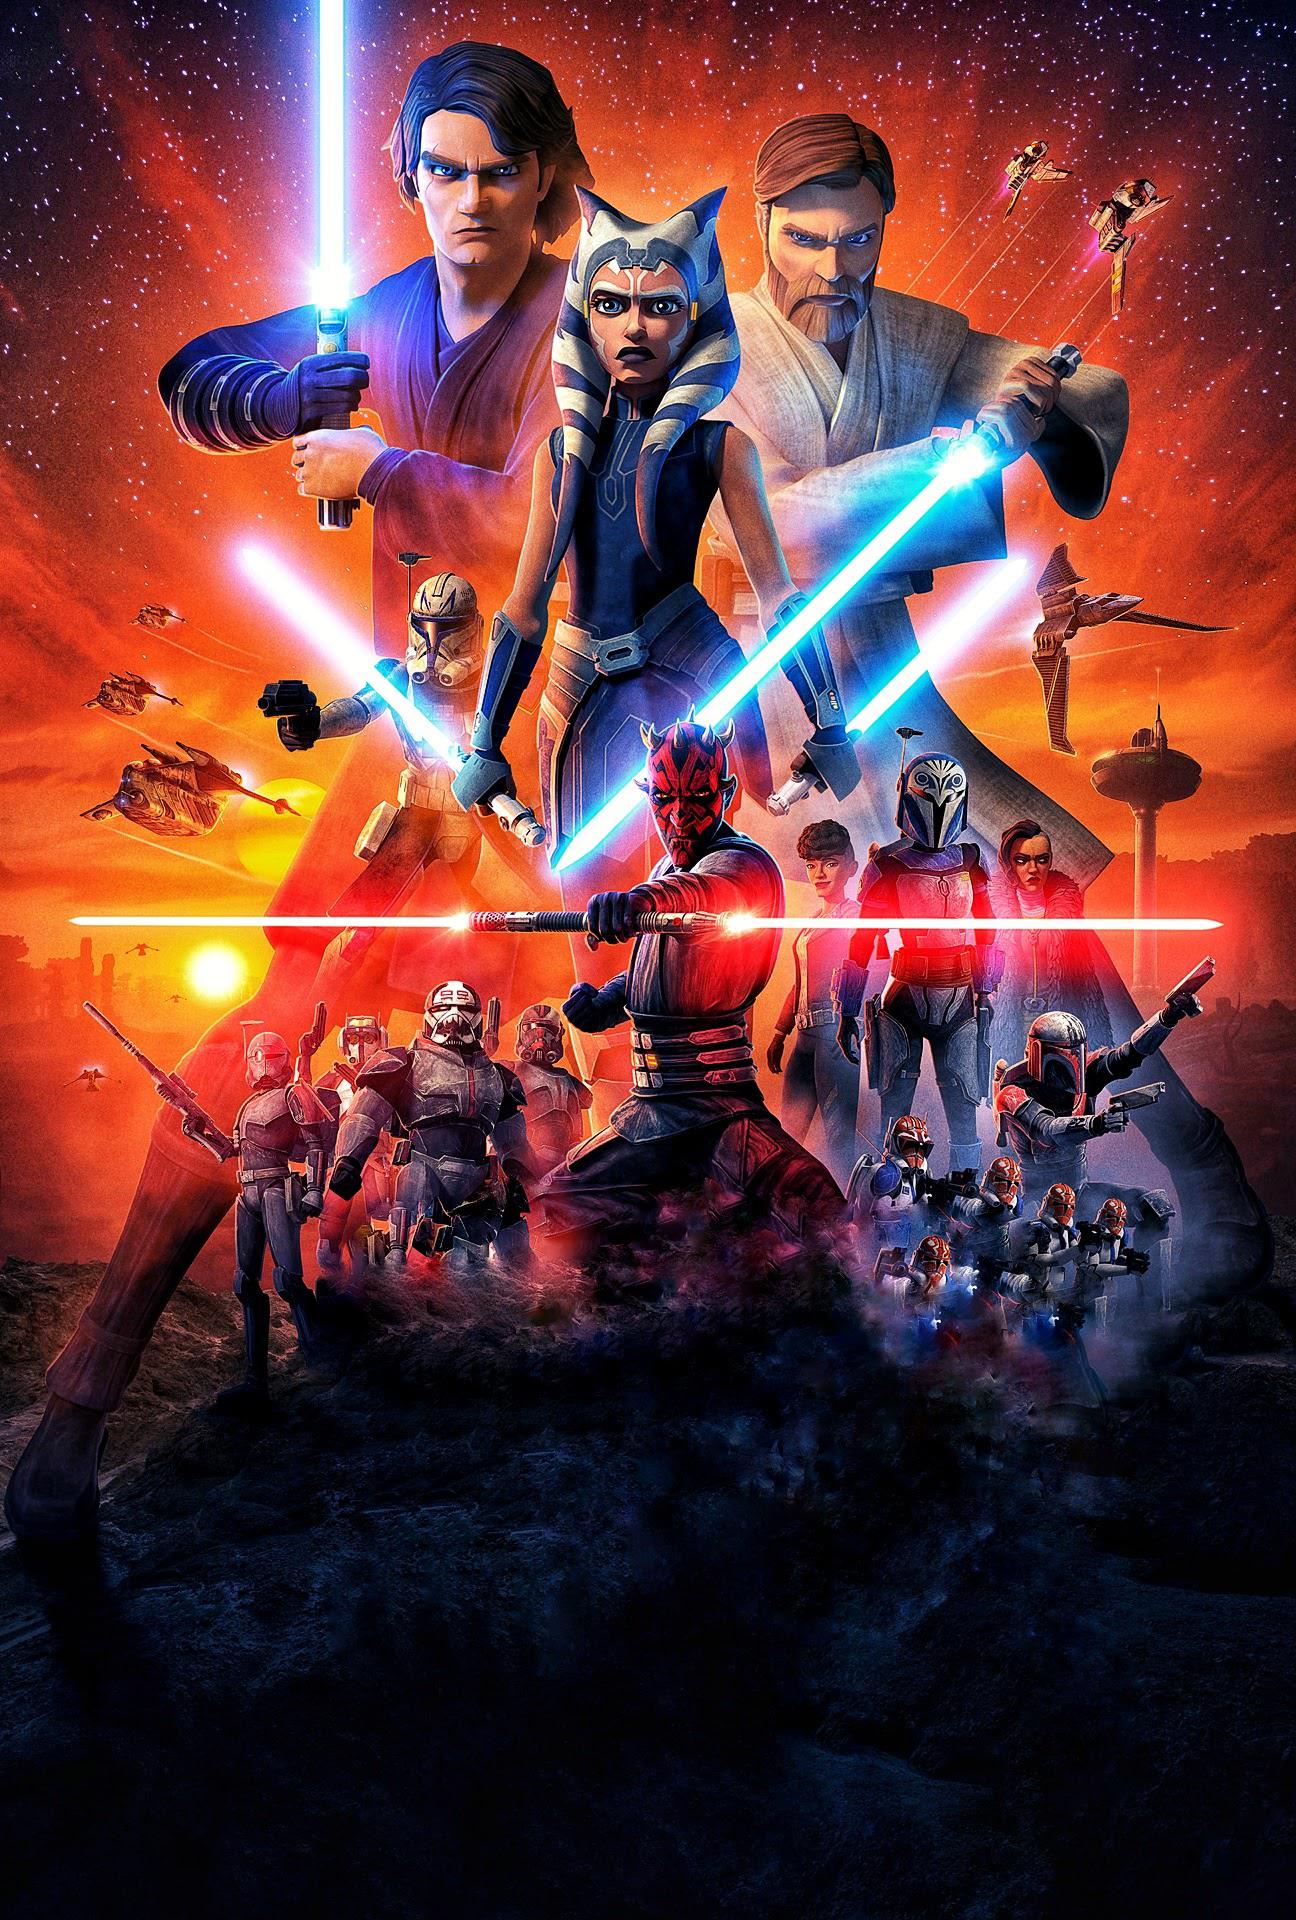 1296x1920 I Removed The Title And The Disney Logo From The Poster To Create